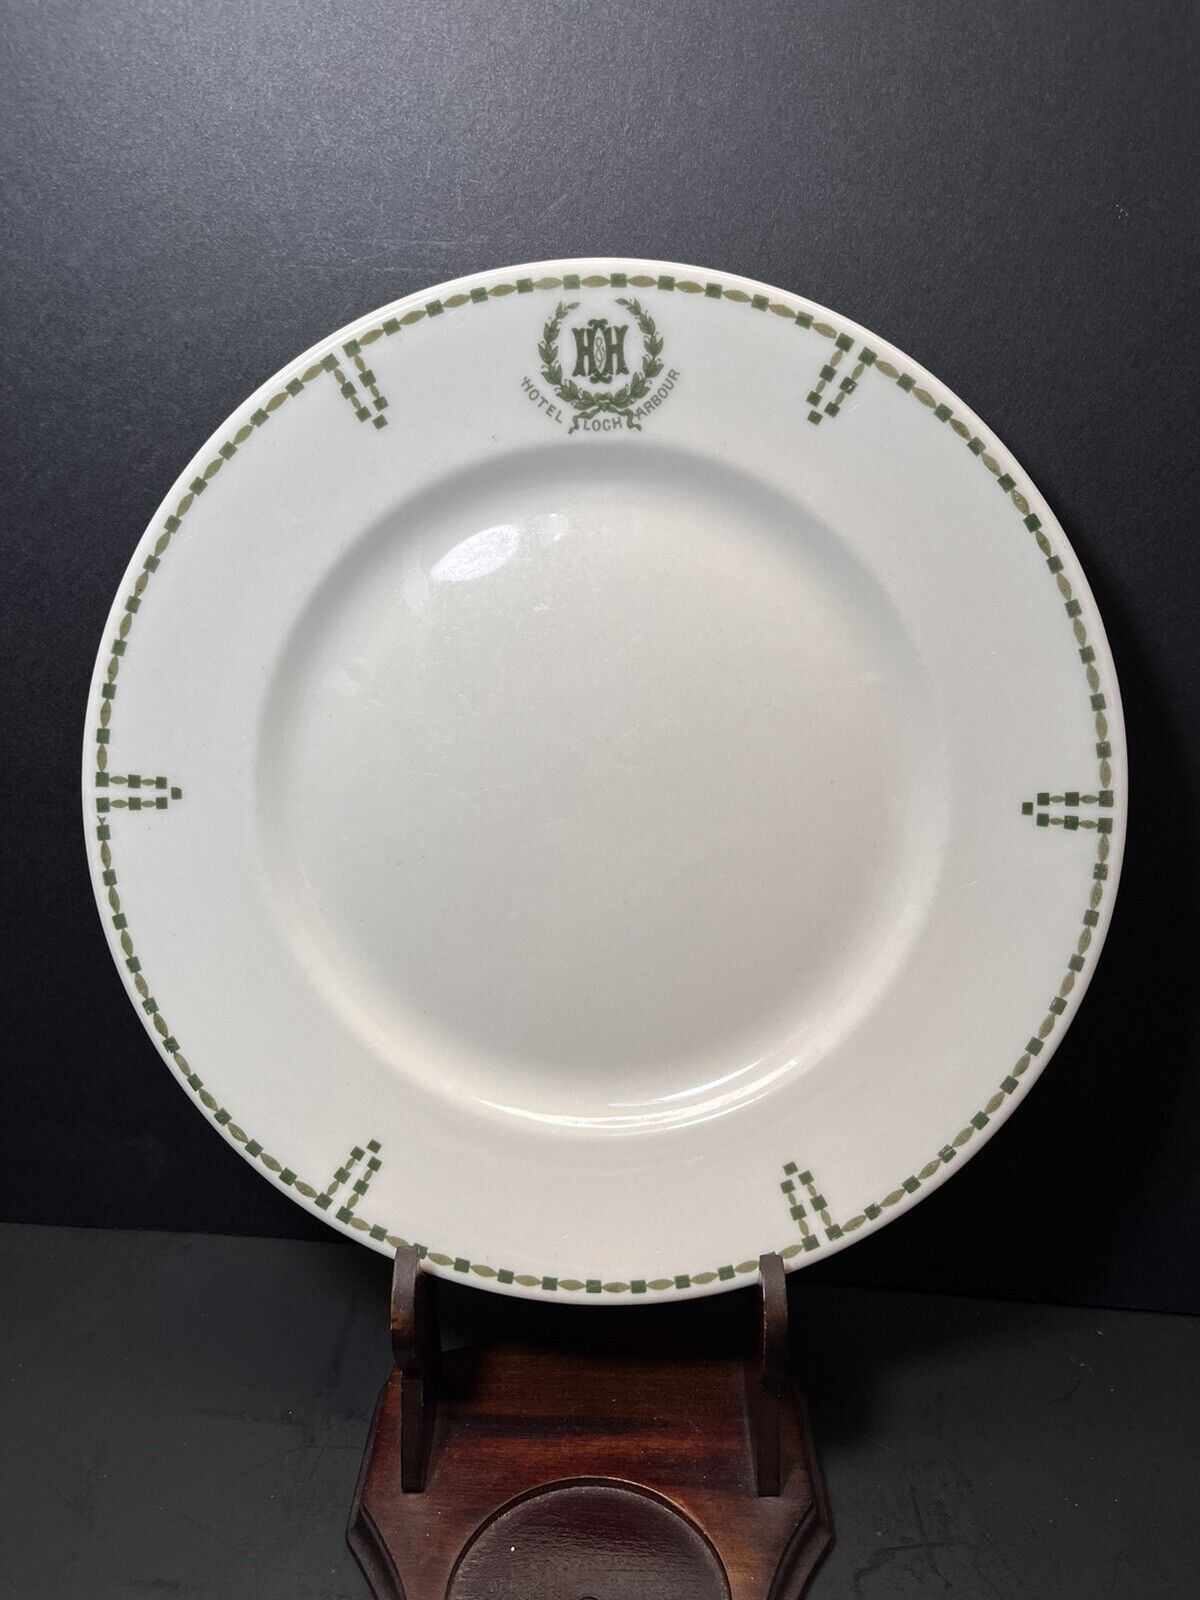 HOTEL LOCH ARBOUR Vintage Restaurant Plate NJ ~ Maddock\'s American China